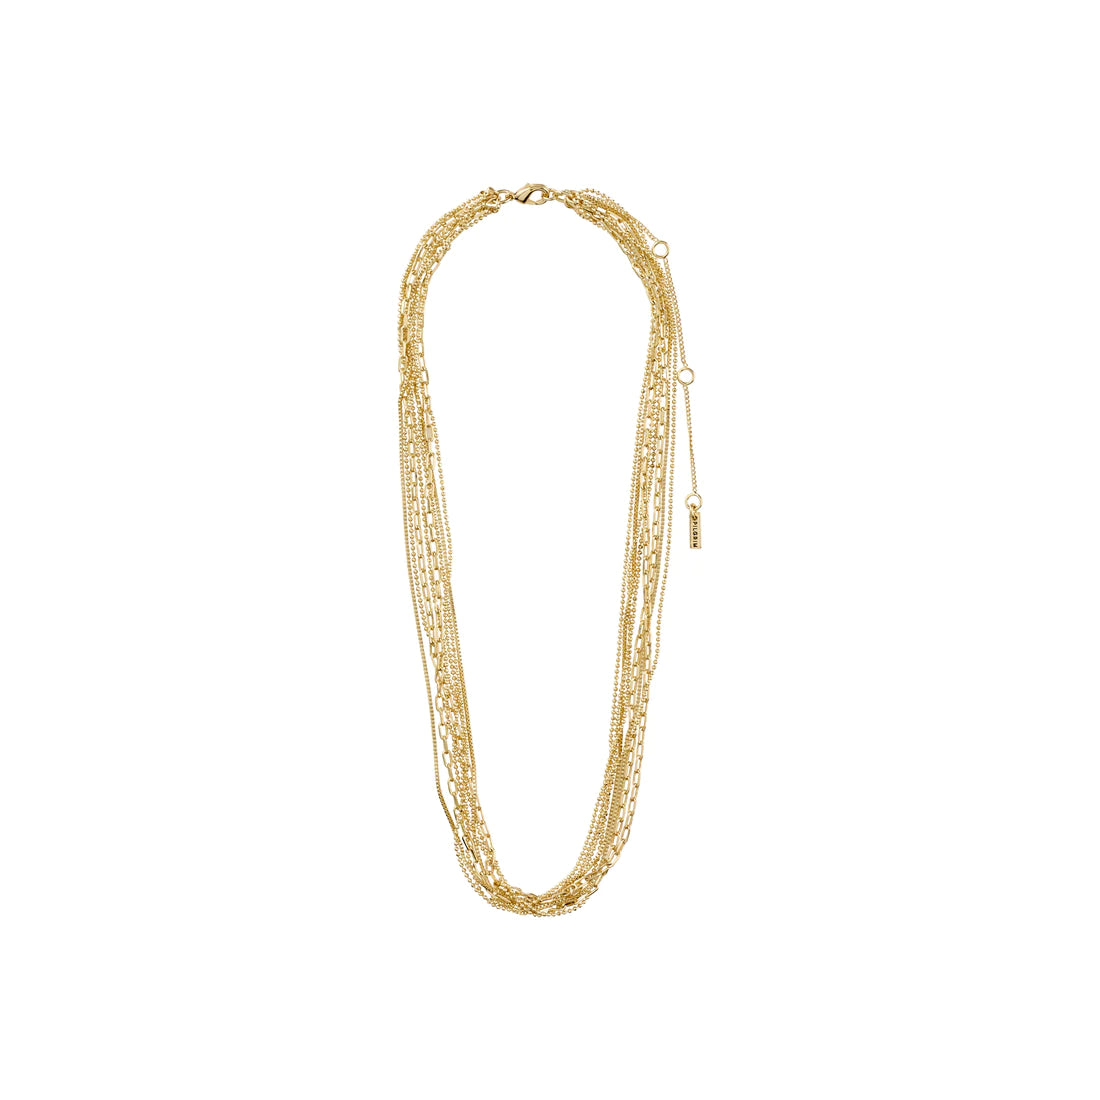 Pilgrim LILY Chain Necklace Gold-Plated